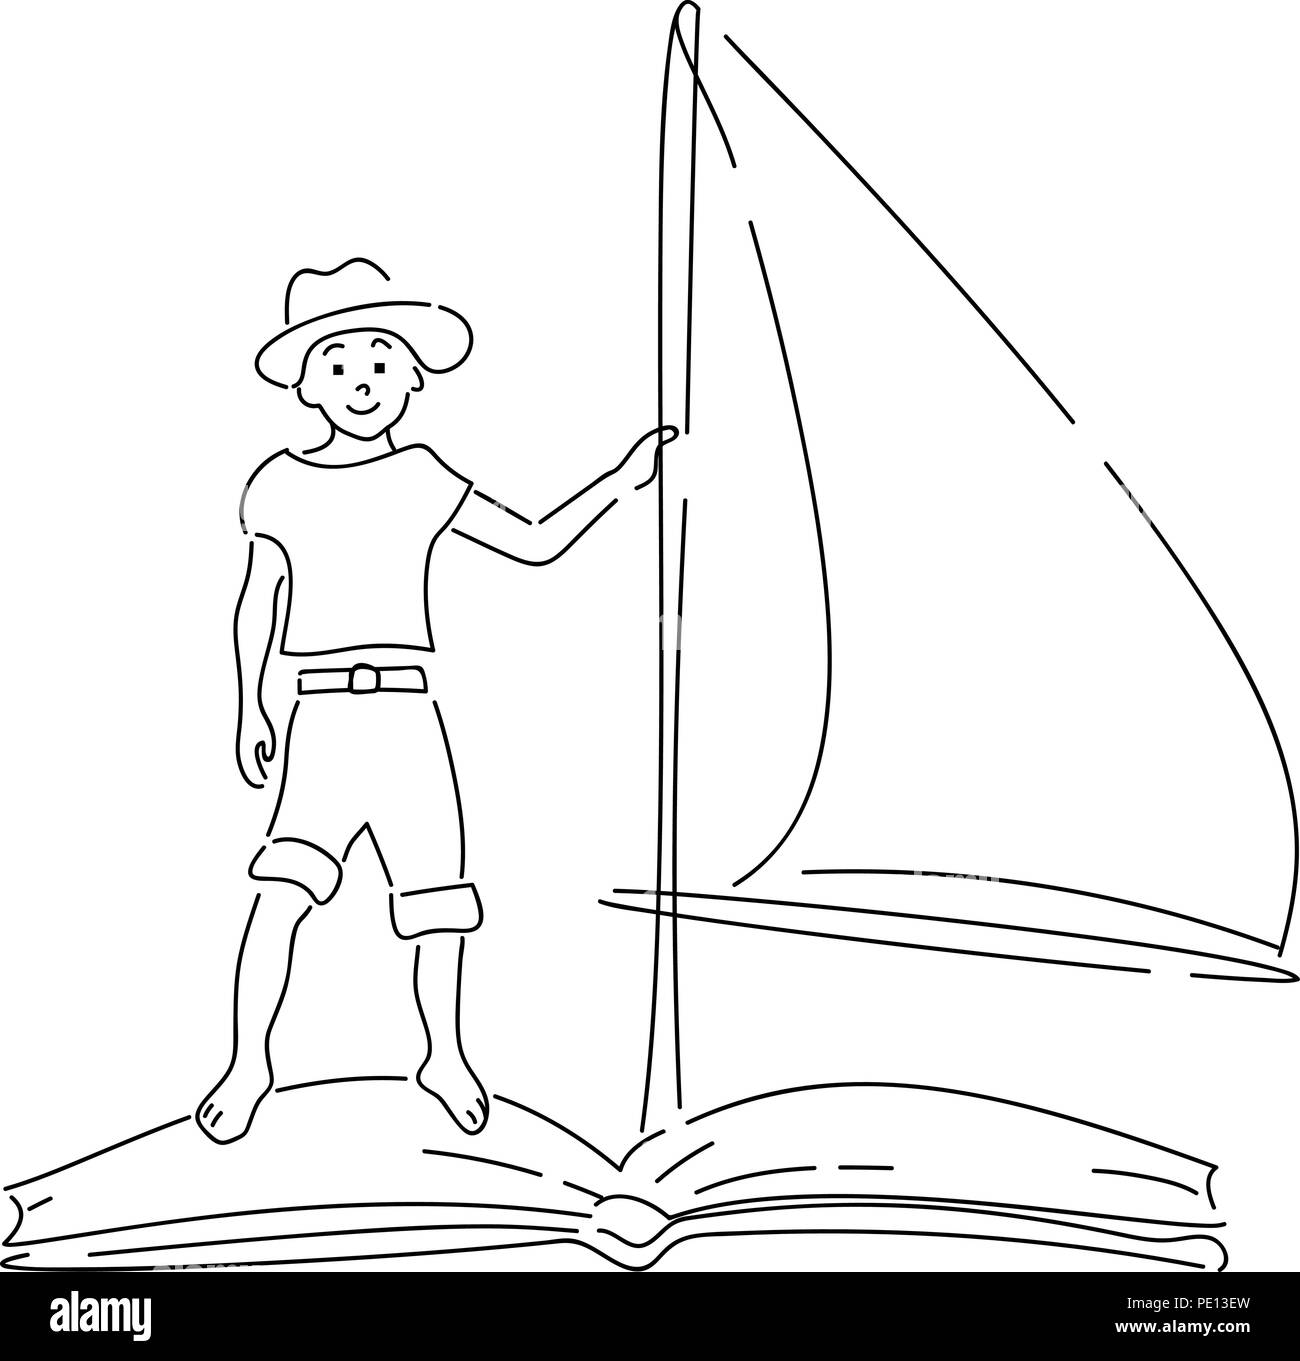 Boy floating on book with sail. Hand drawn style doodle design. Vector illustration Stock Vector